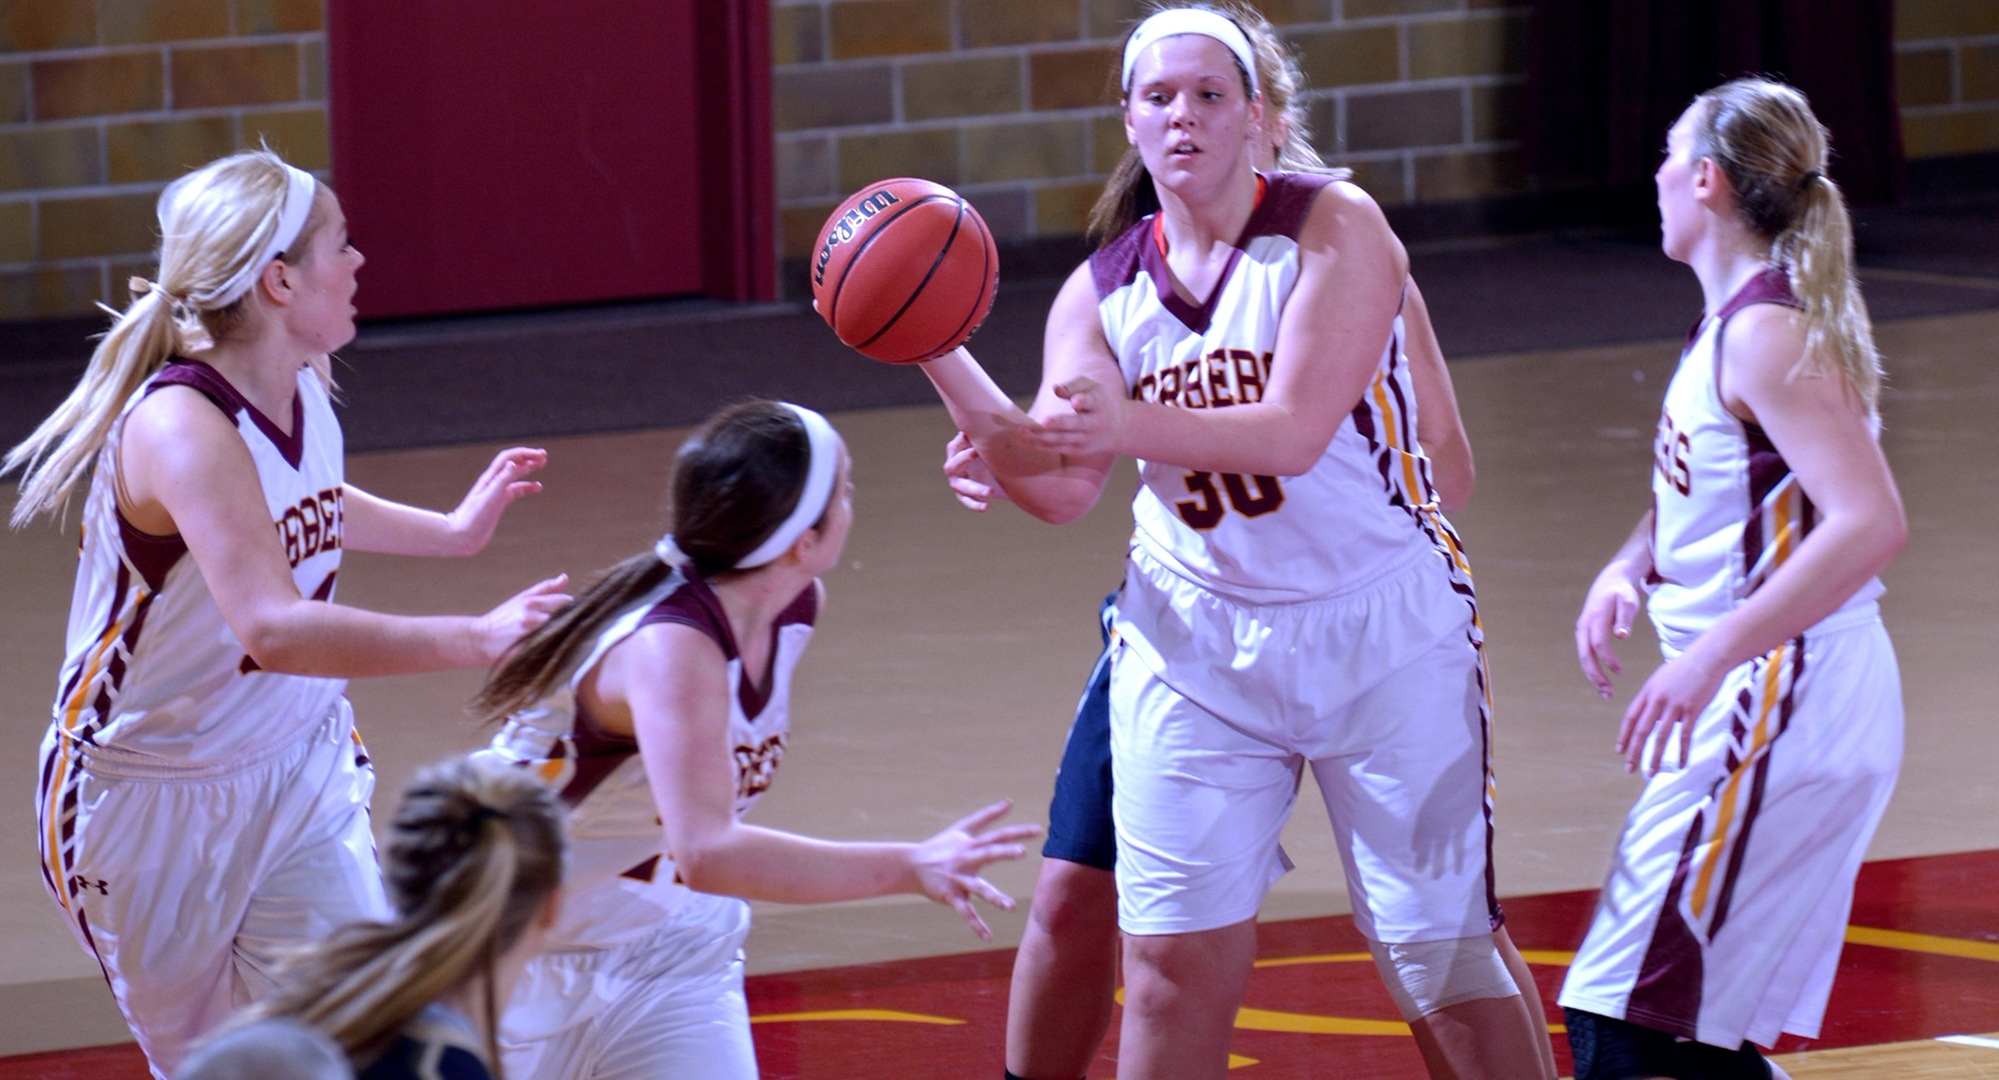 Freshman Shelby Duckstad outlets the ball after grabbing one of her career-high five rebounds. She also scored a career-high 16 points in the Cobbers' game with Bethel.